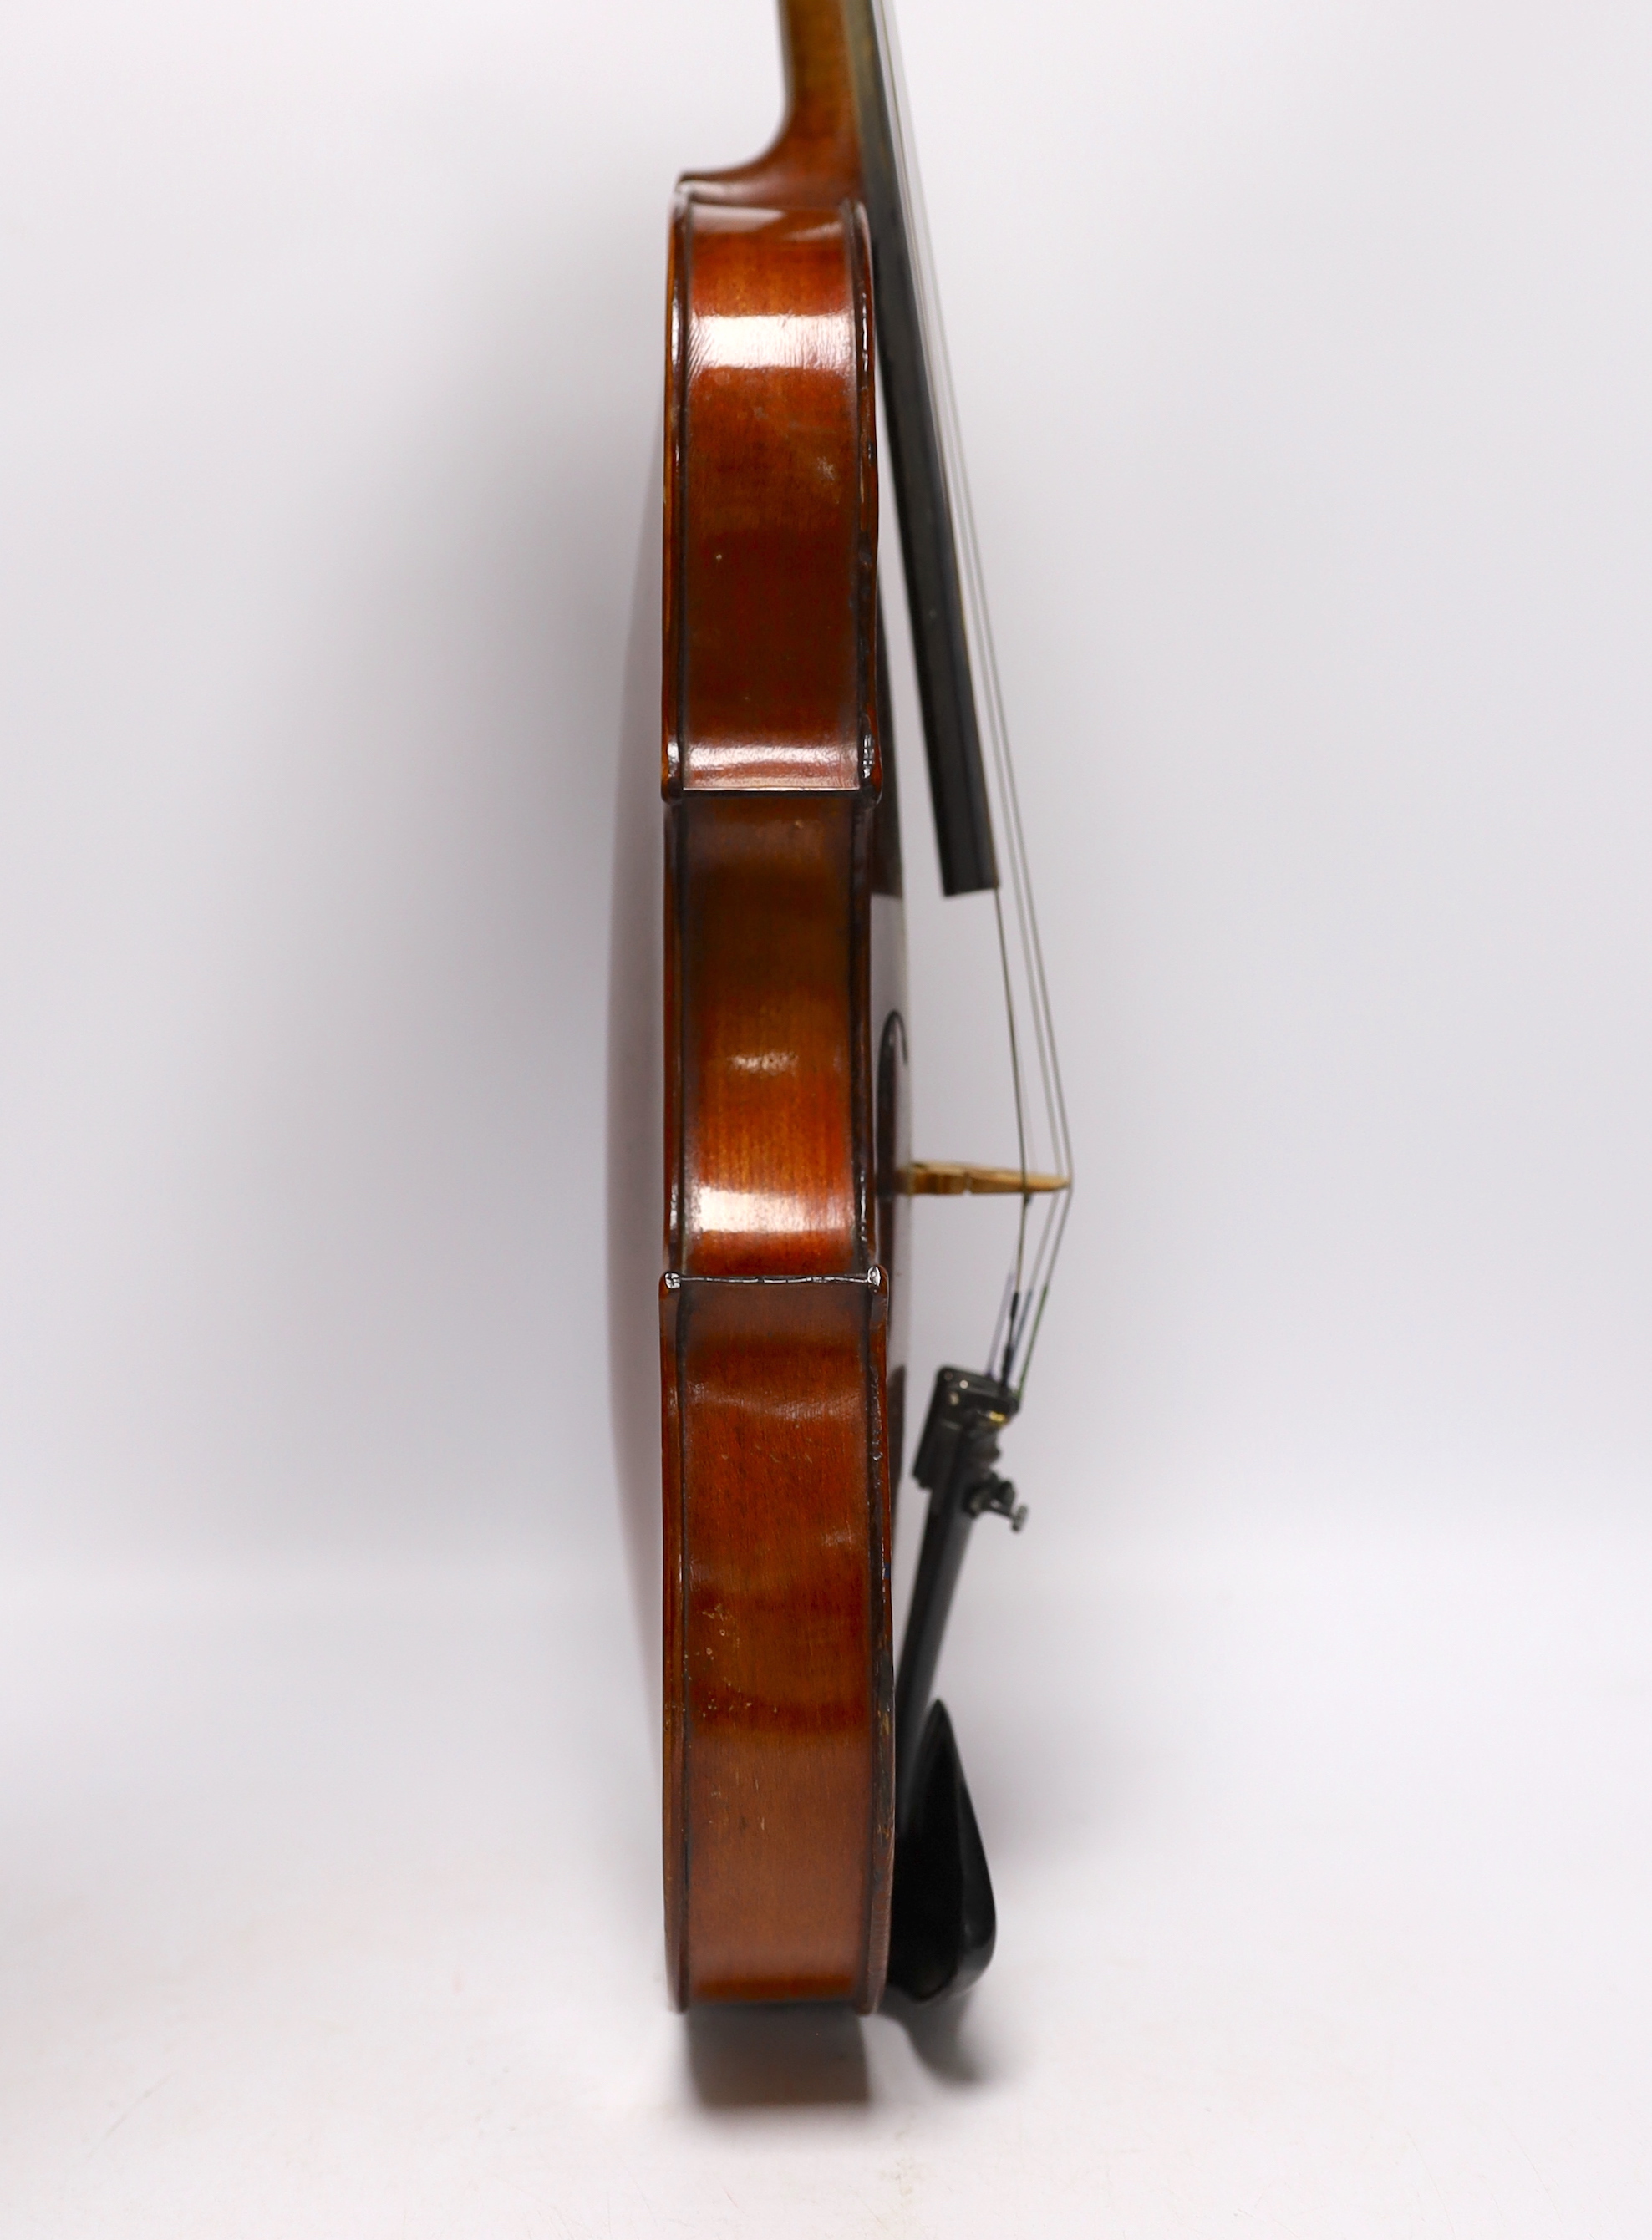 A wooden cased student violin